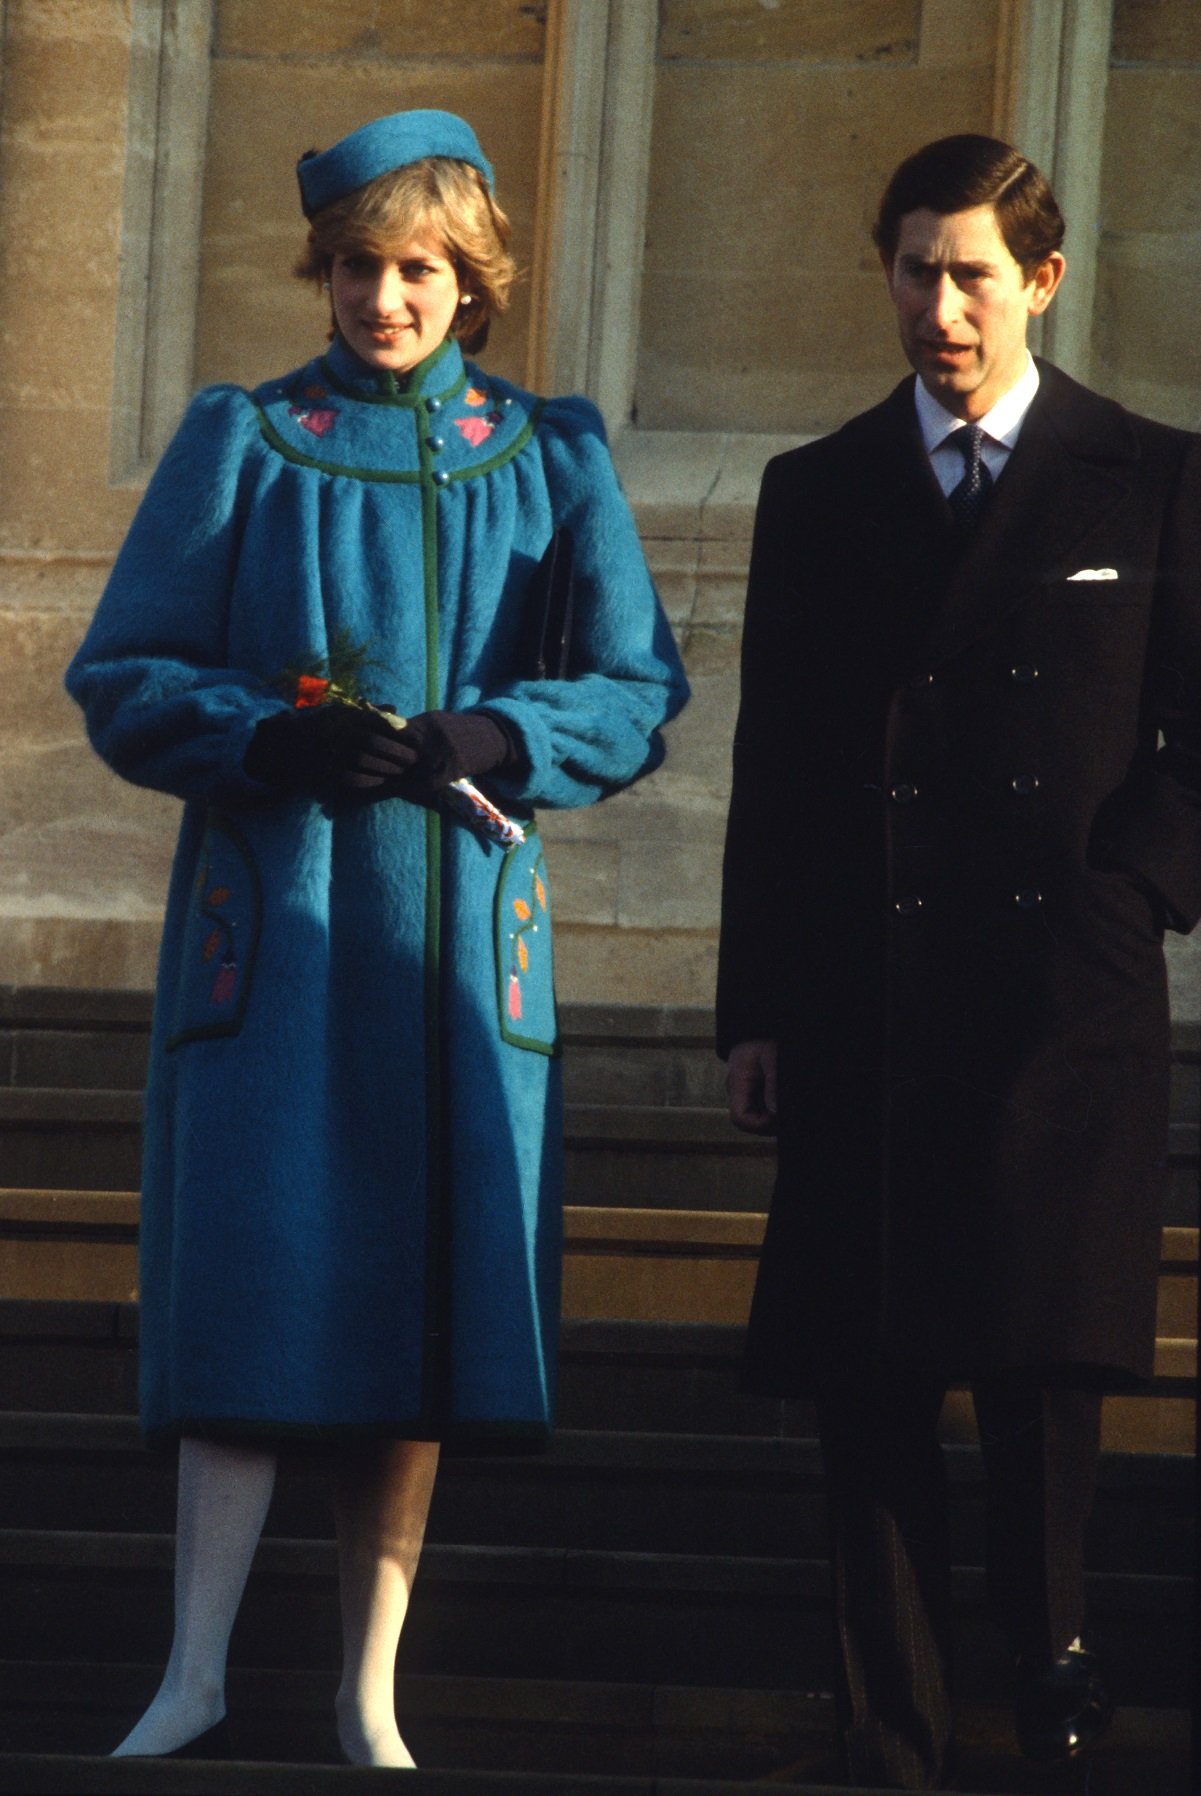 Prince Charles in suit and long jacket, and Princess Diana wearing a blue maternity coat and a matching pillbox hat, standing outside church after Christmas Day service